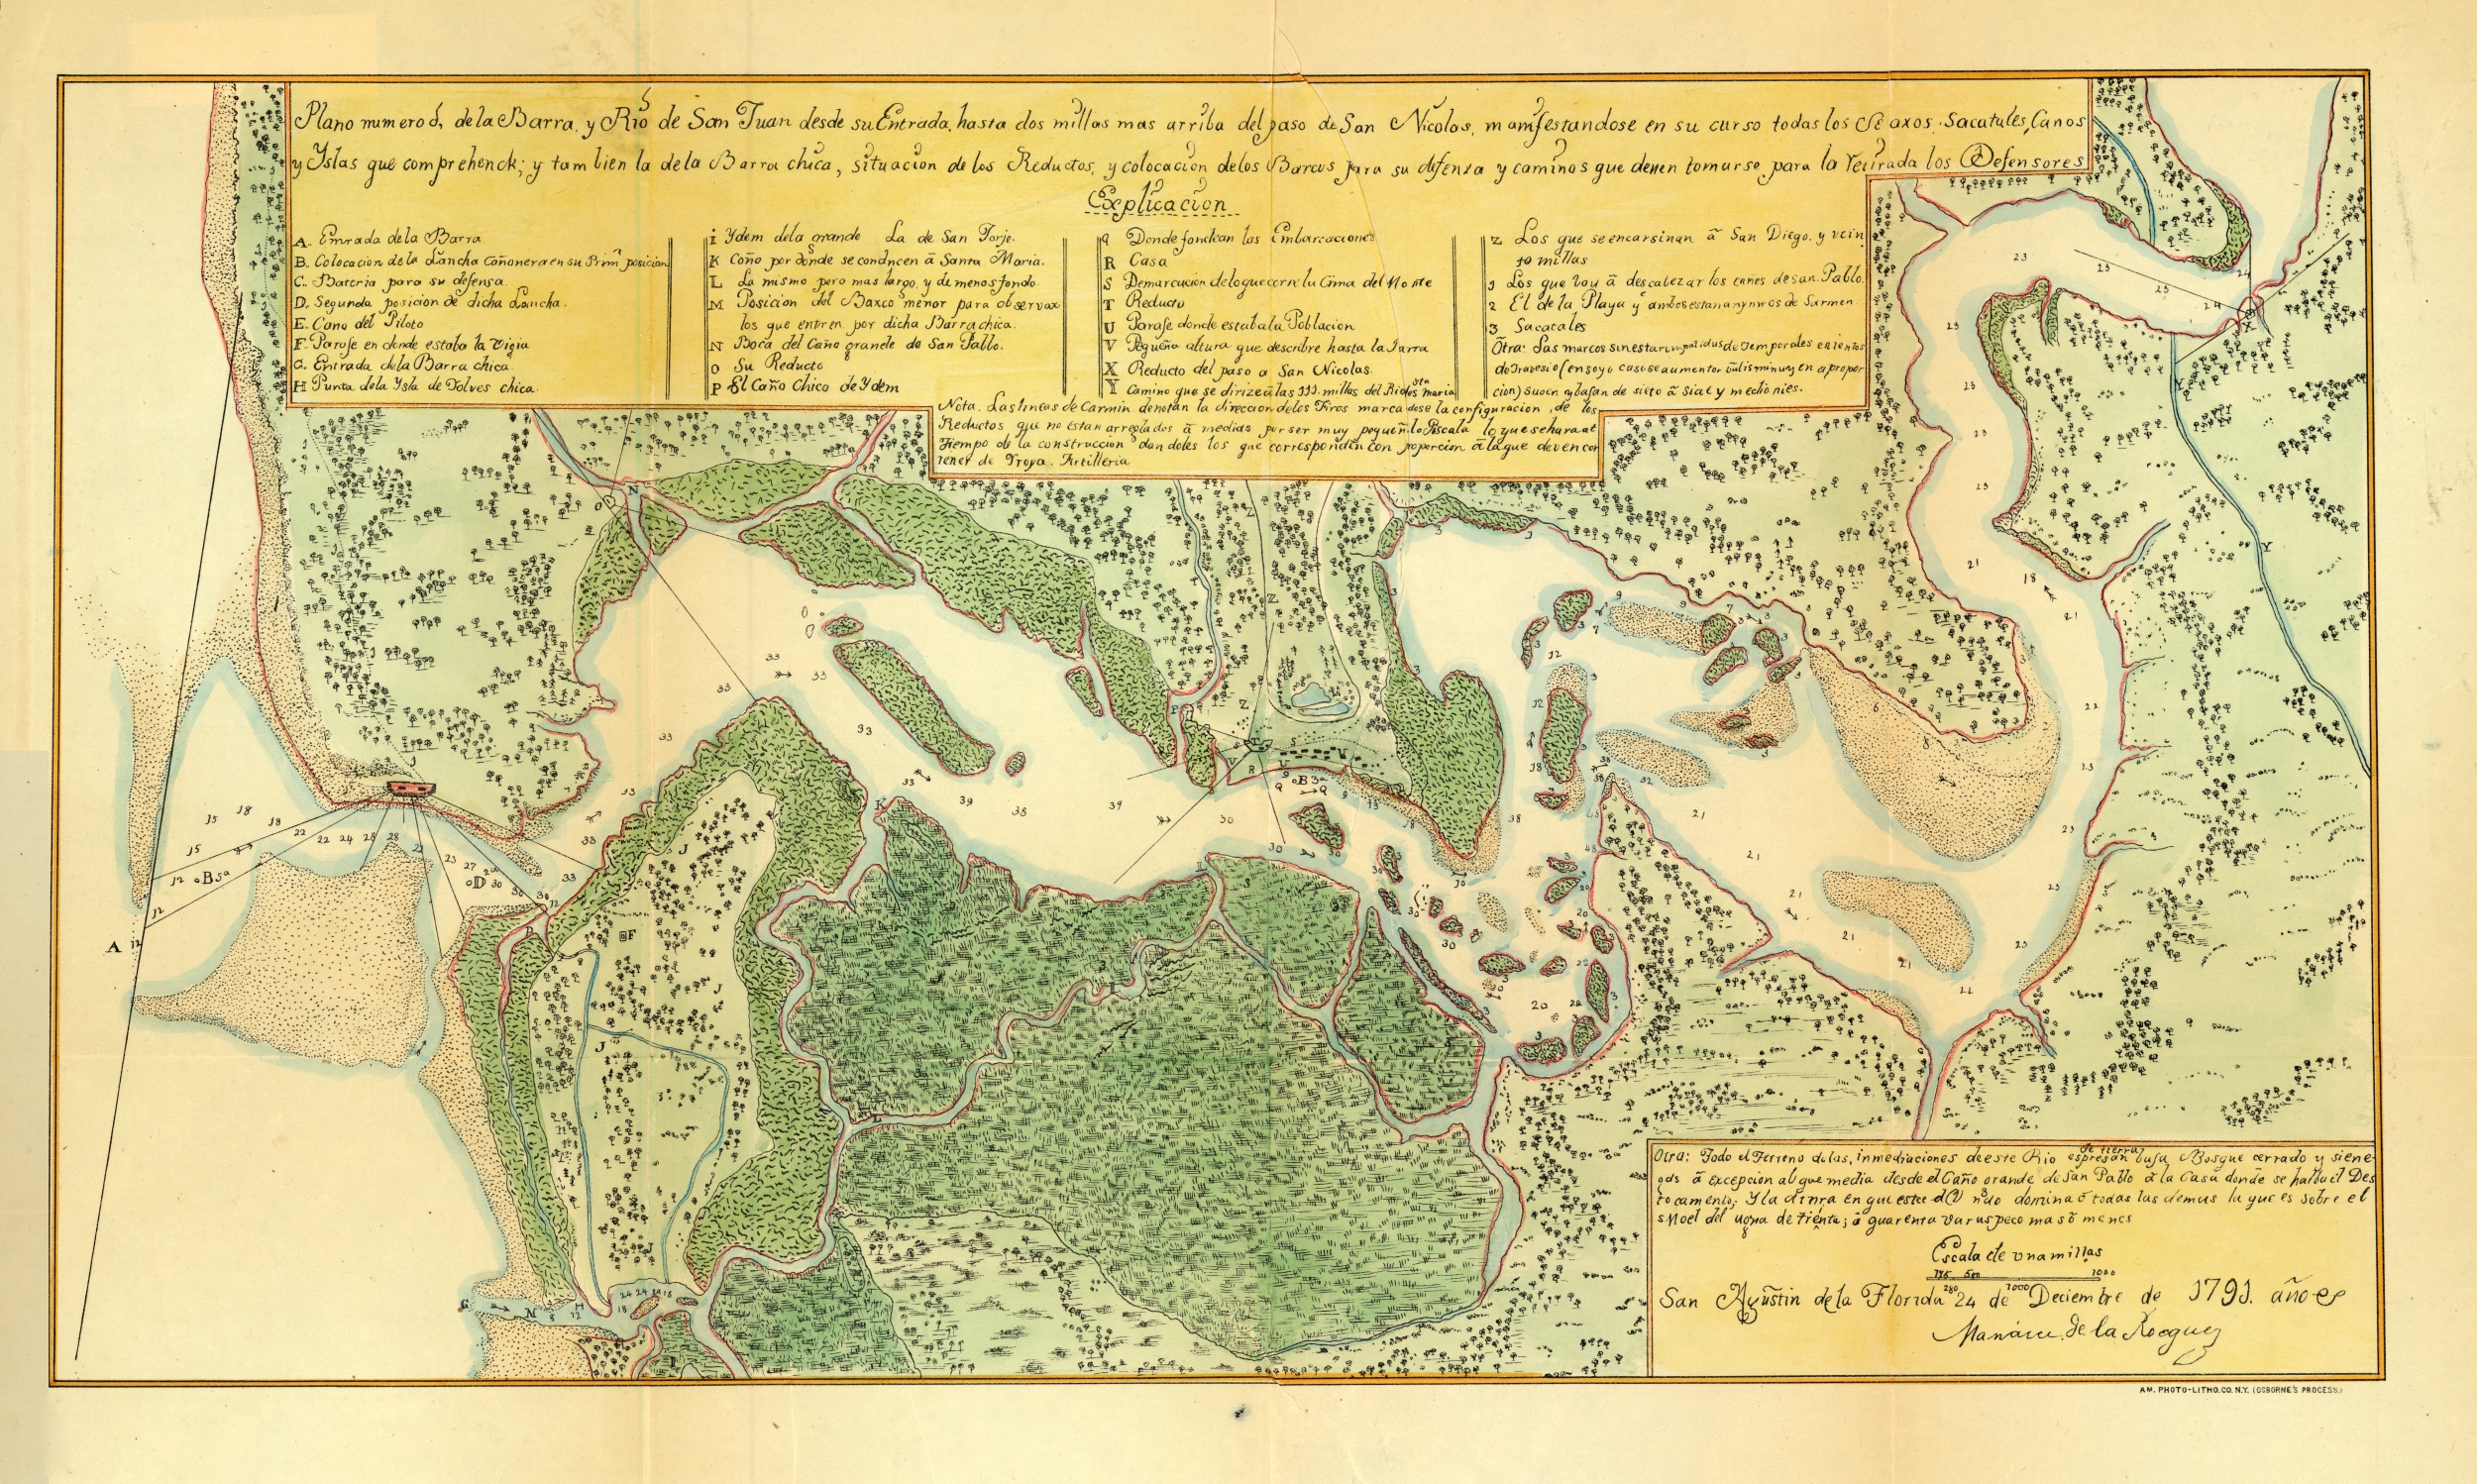 Map of the St. Johns River, 1791